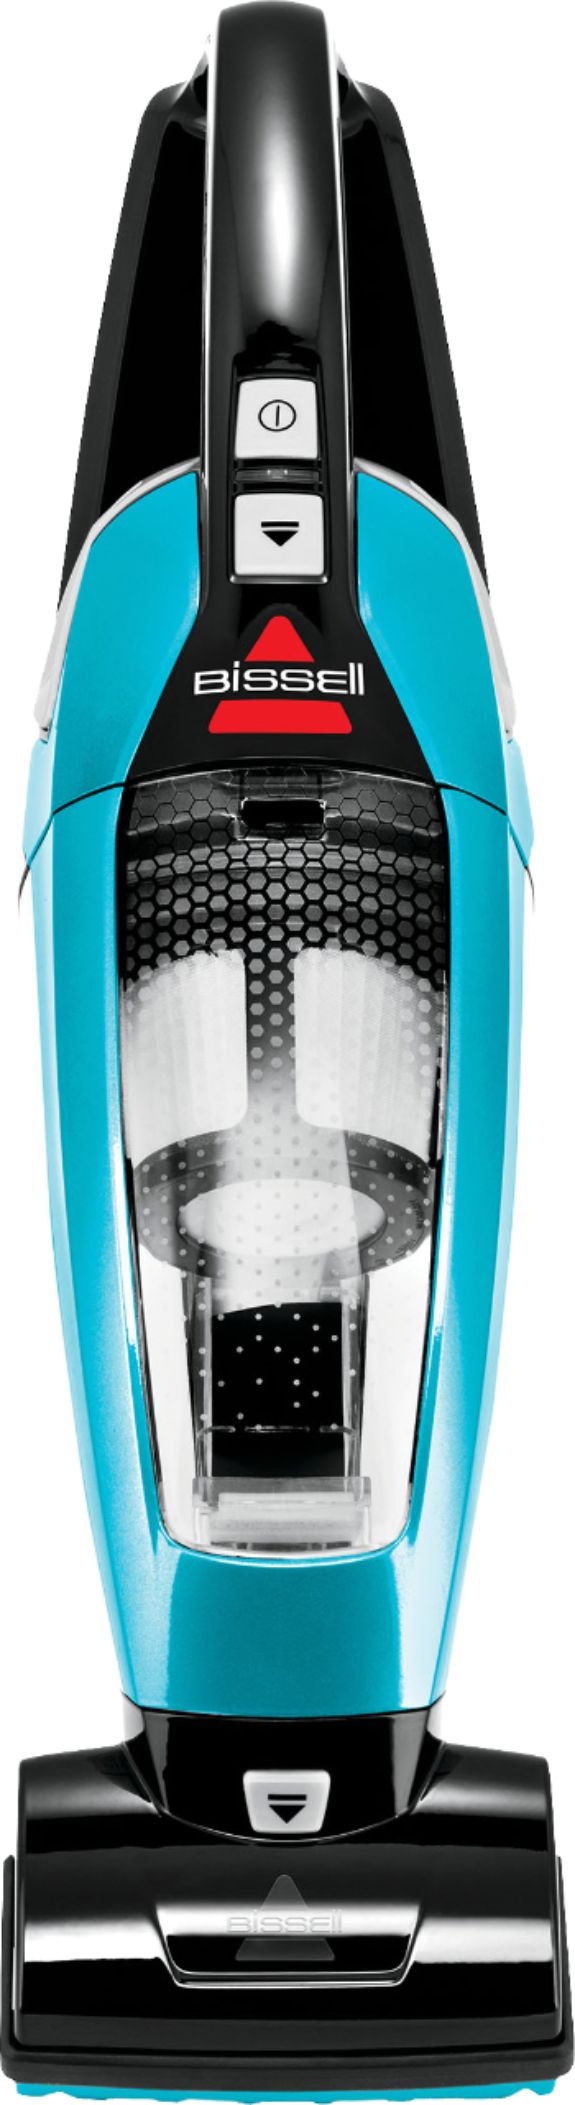 BISSELL - Pet Hair Eraser Lithium Ion Hand Vacuum - Disco Teal & Black Accents